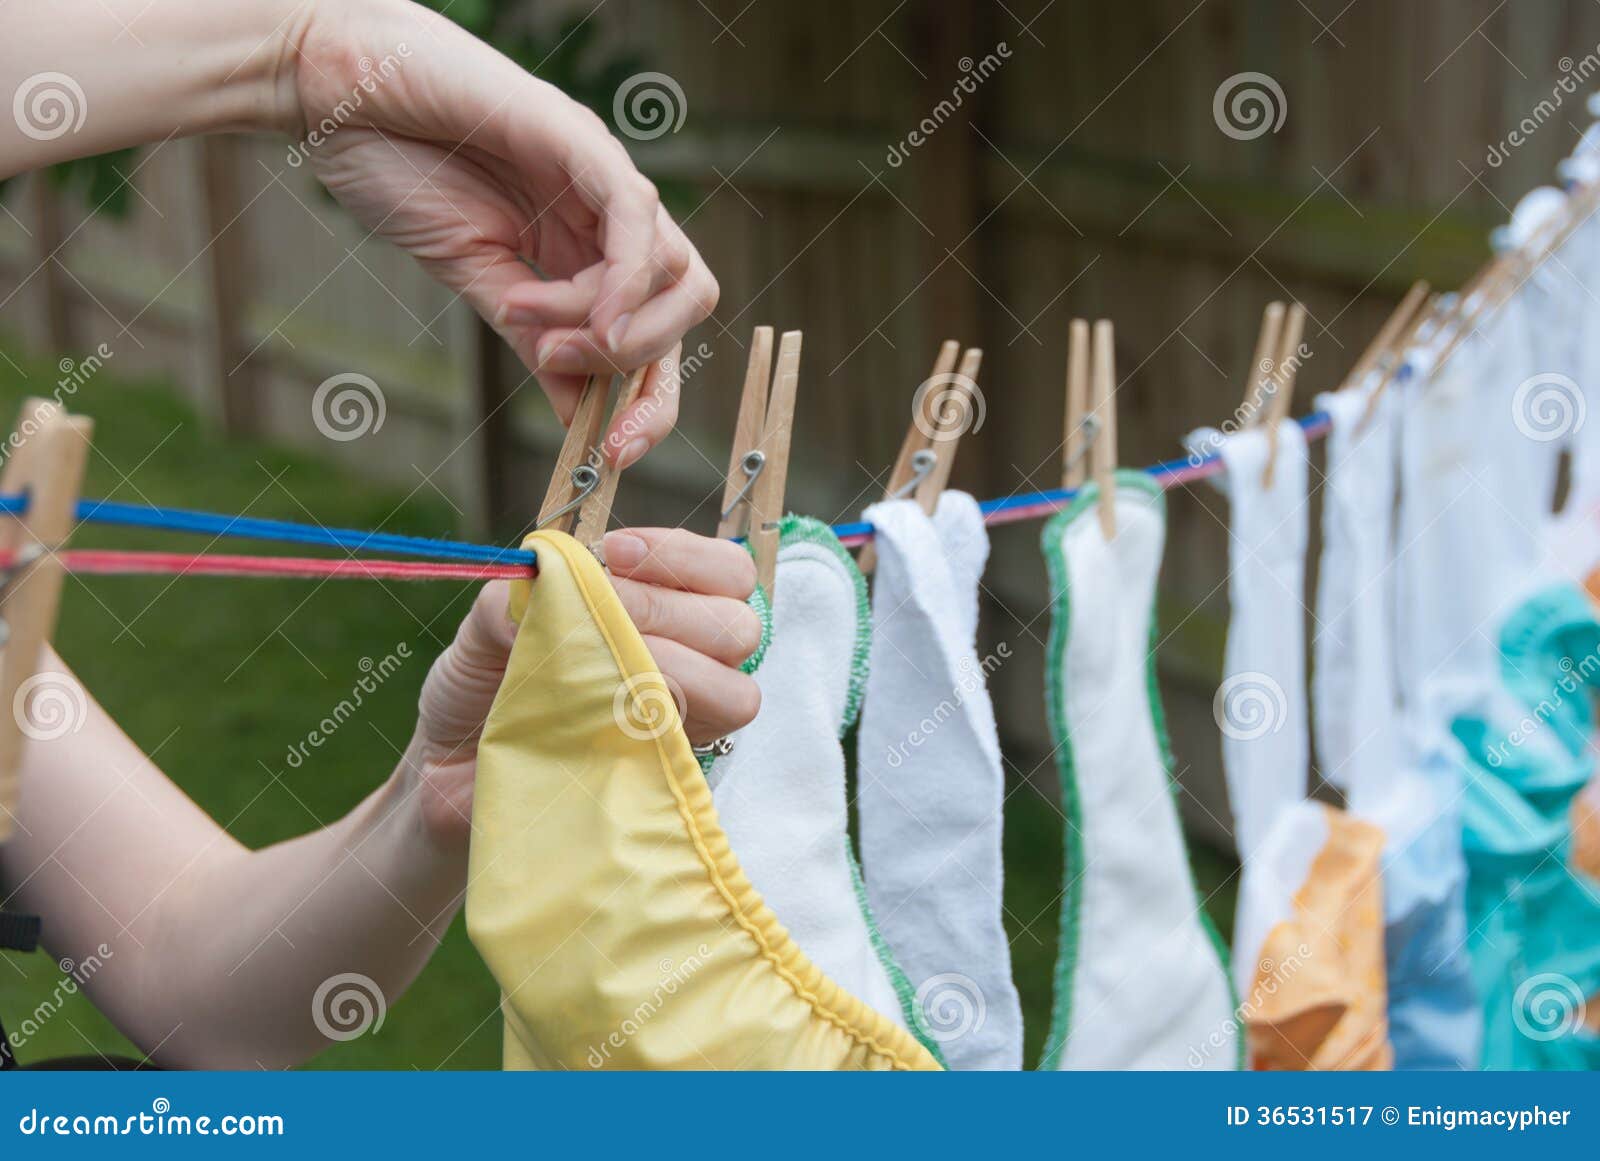 cloth diapers on a clothesline